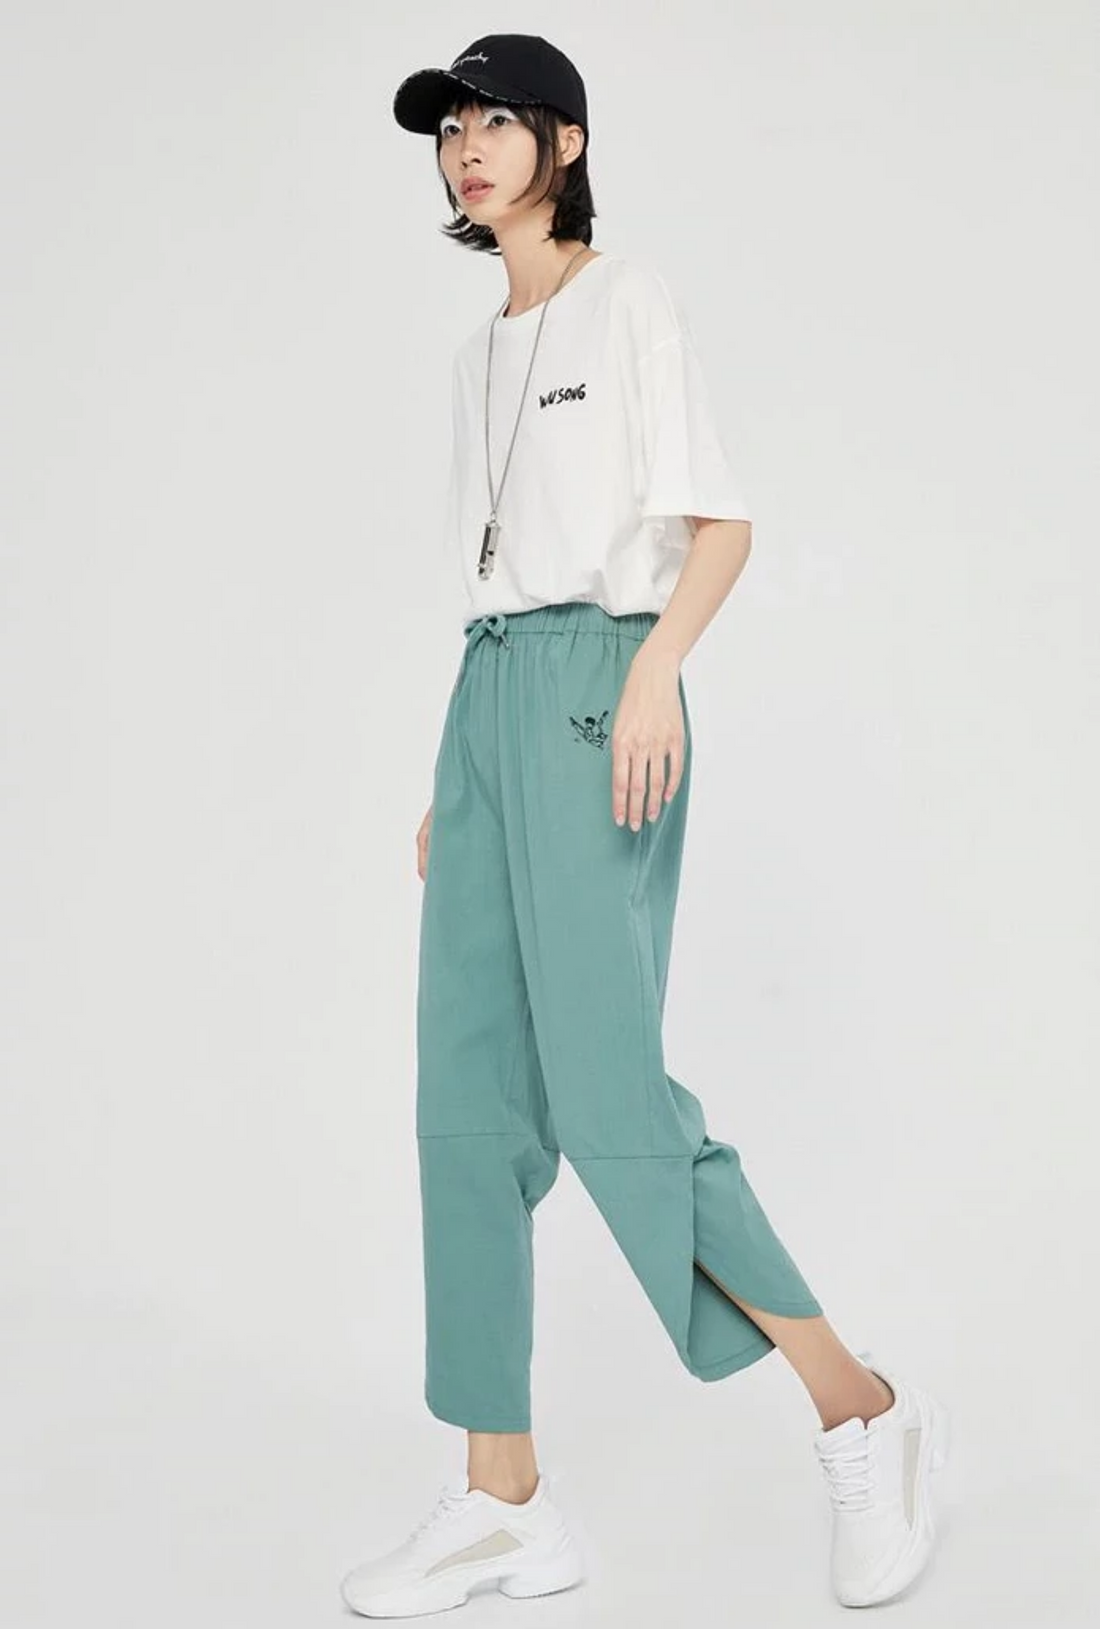 Women's Summer Casual Cotton Pants With Pockets